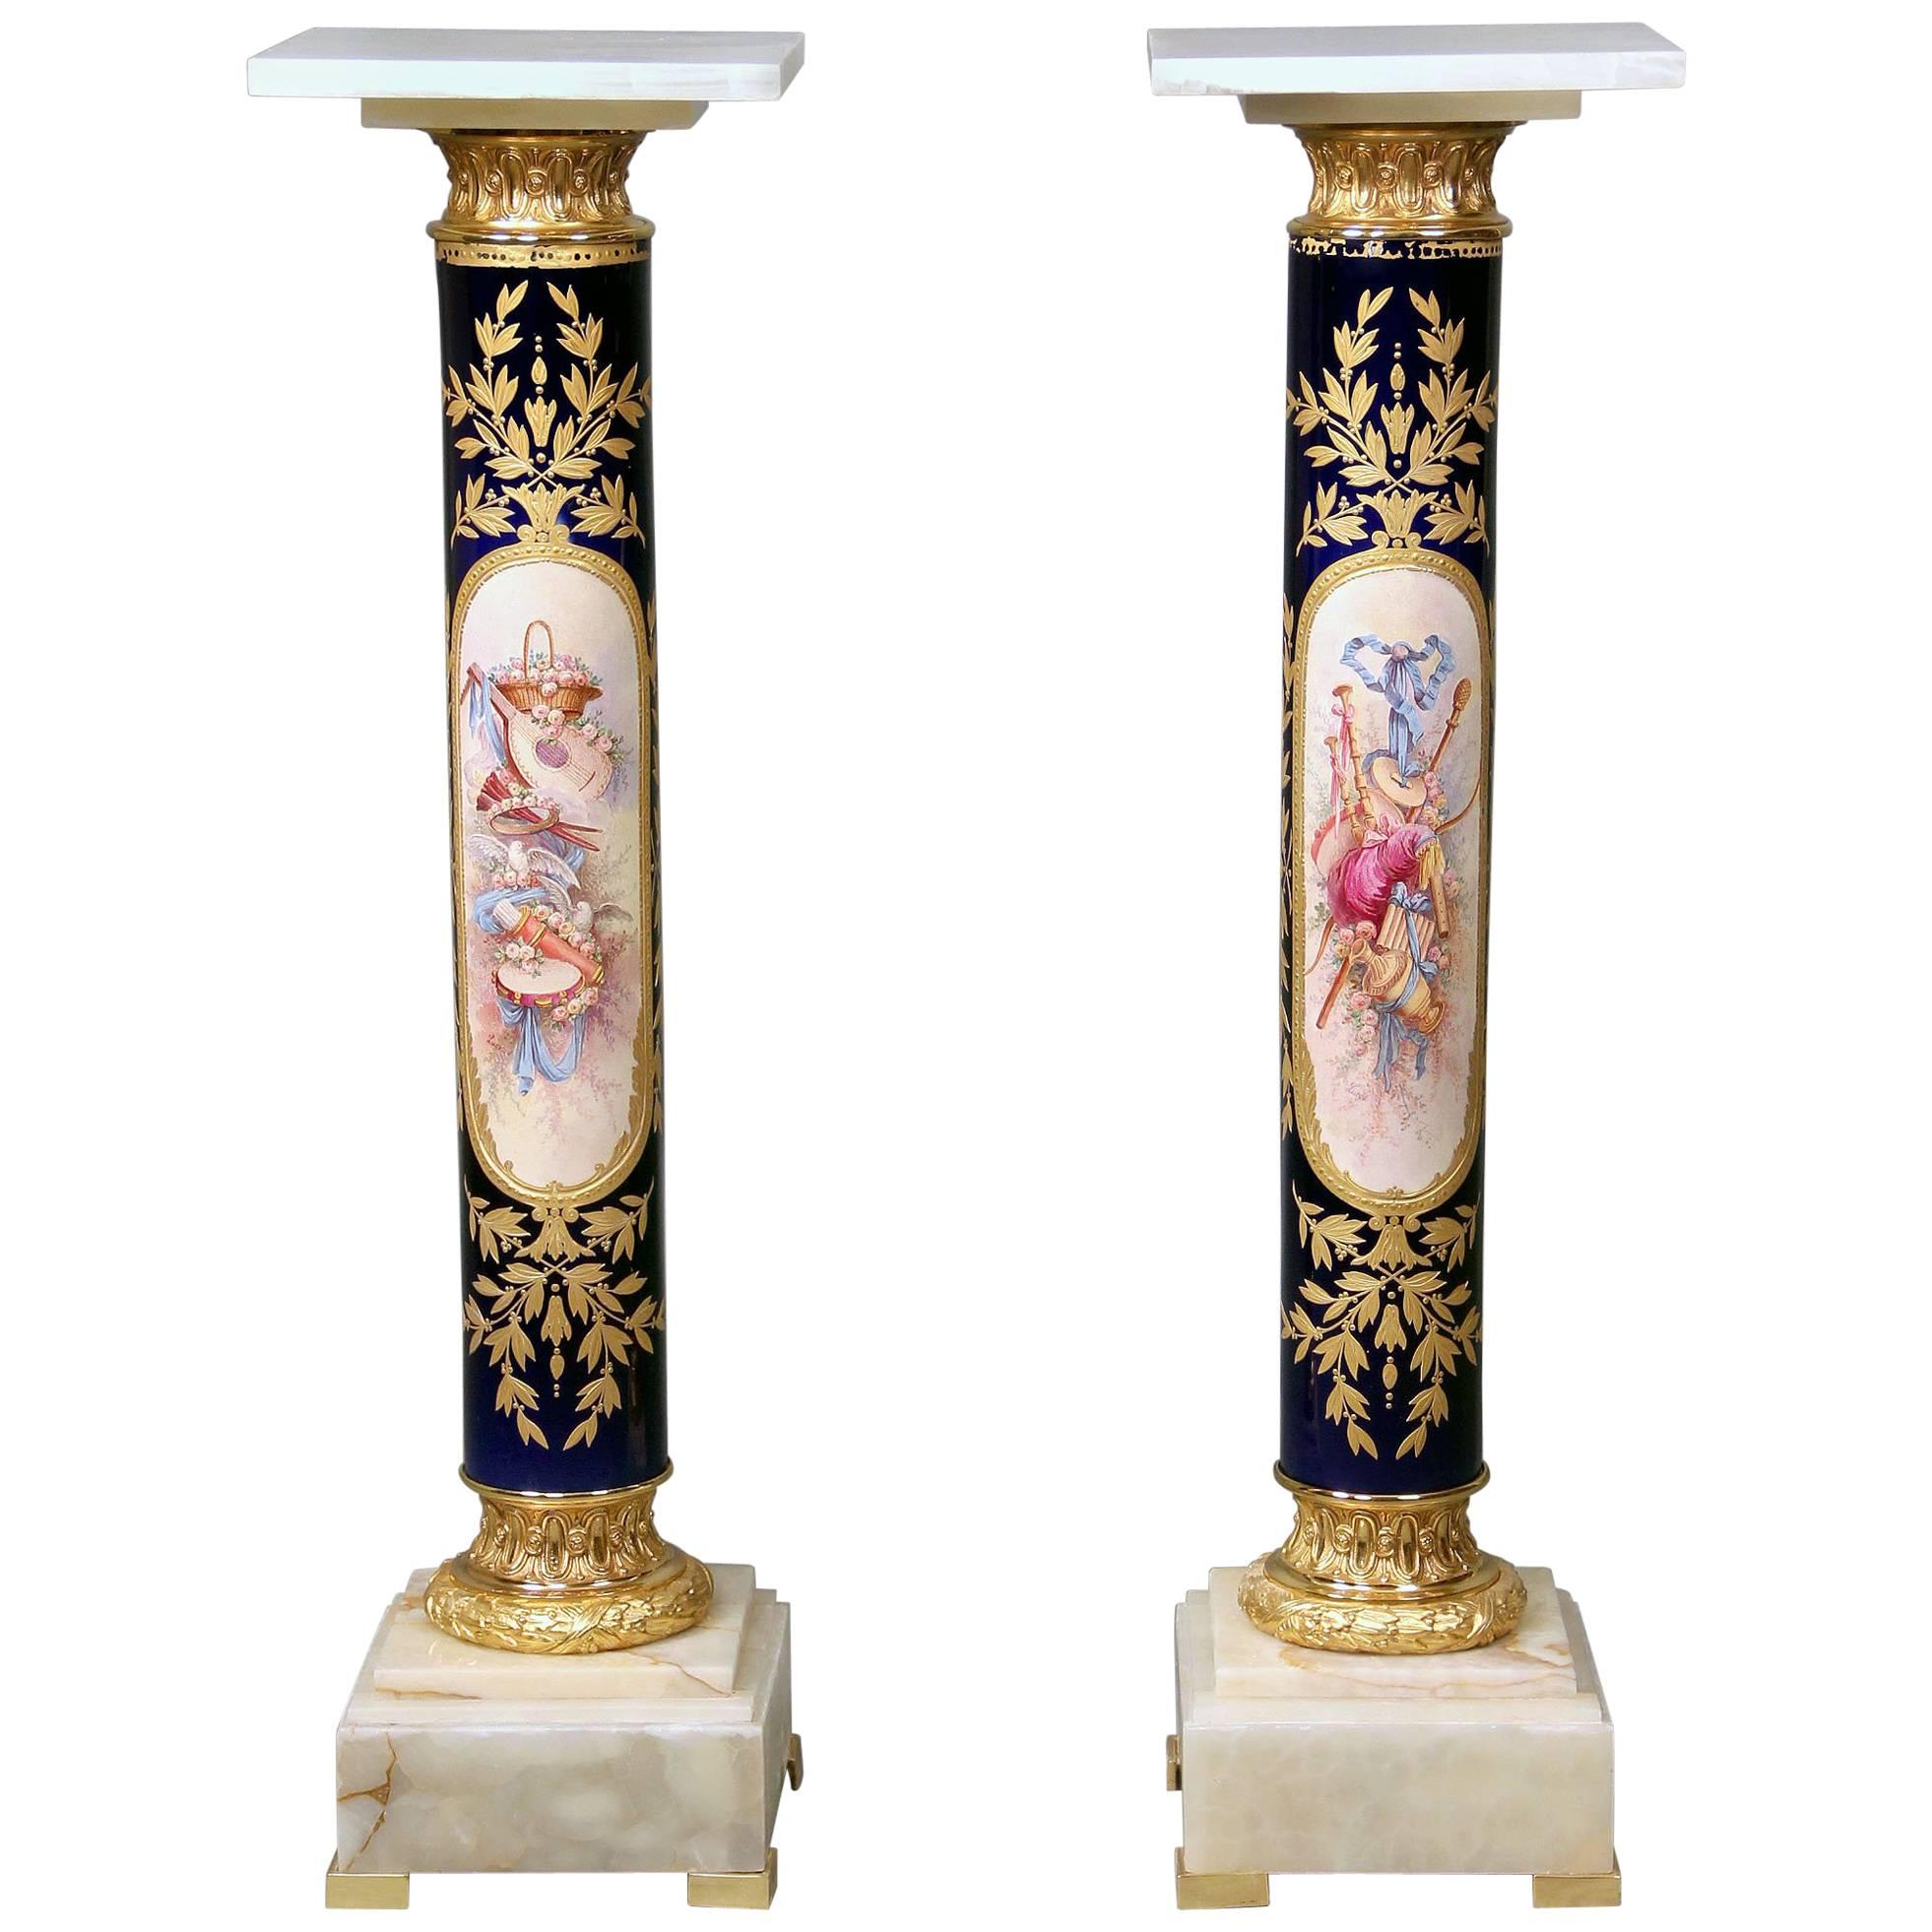 Pair of Late 19th Century Gilt Bronze-Mounted Sèvres Style Porcelain Pedestals